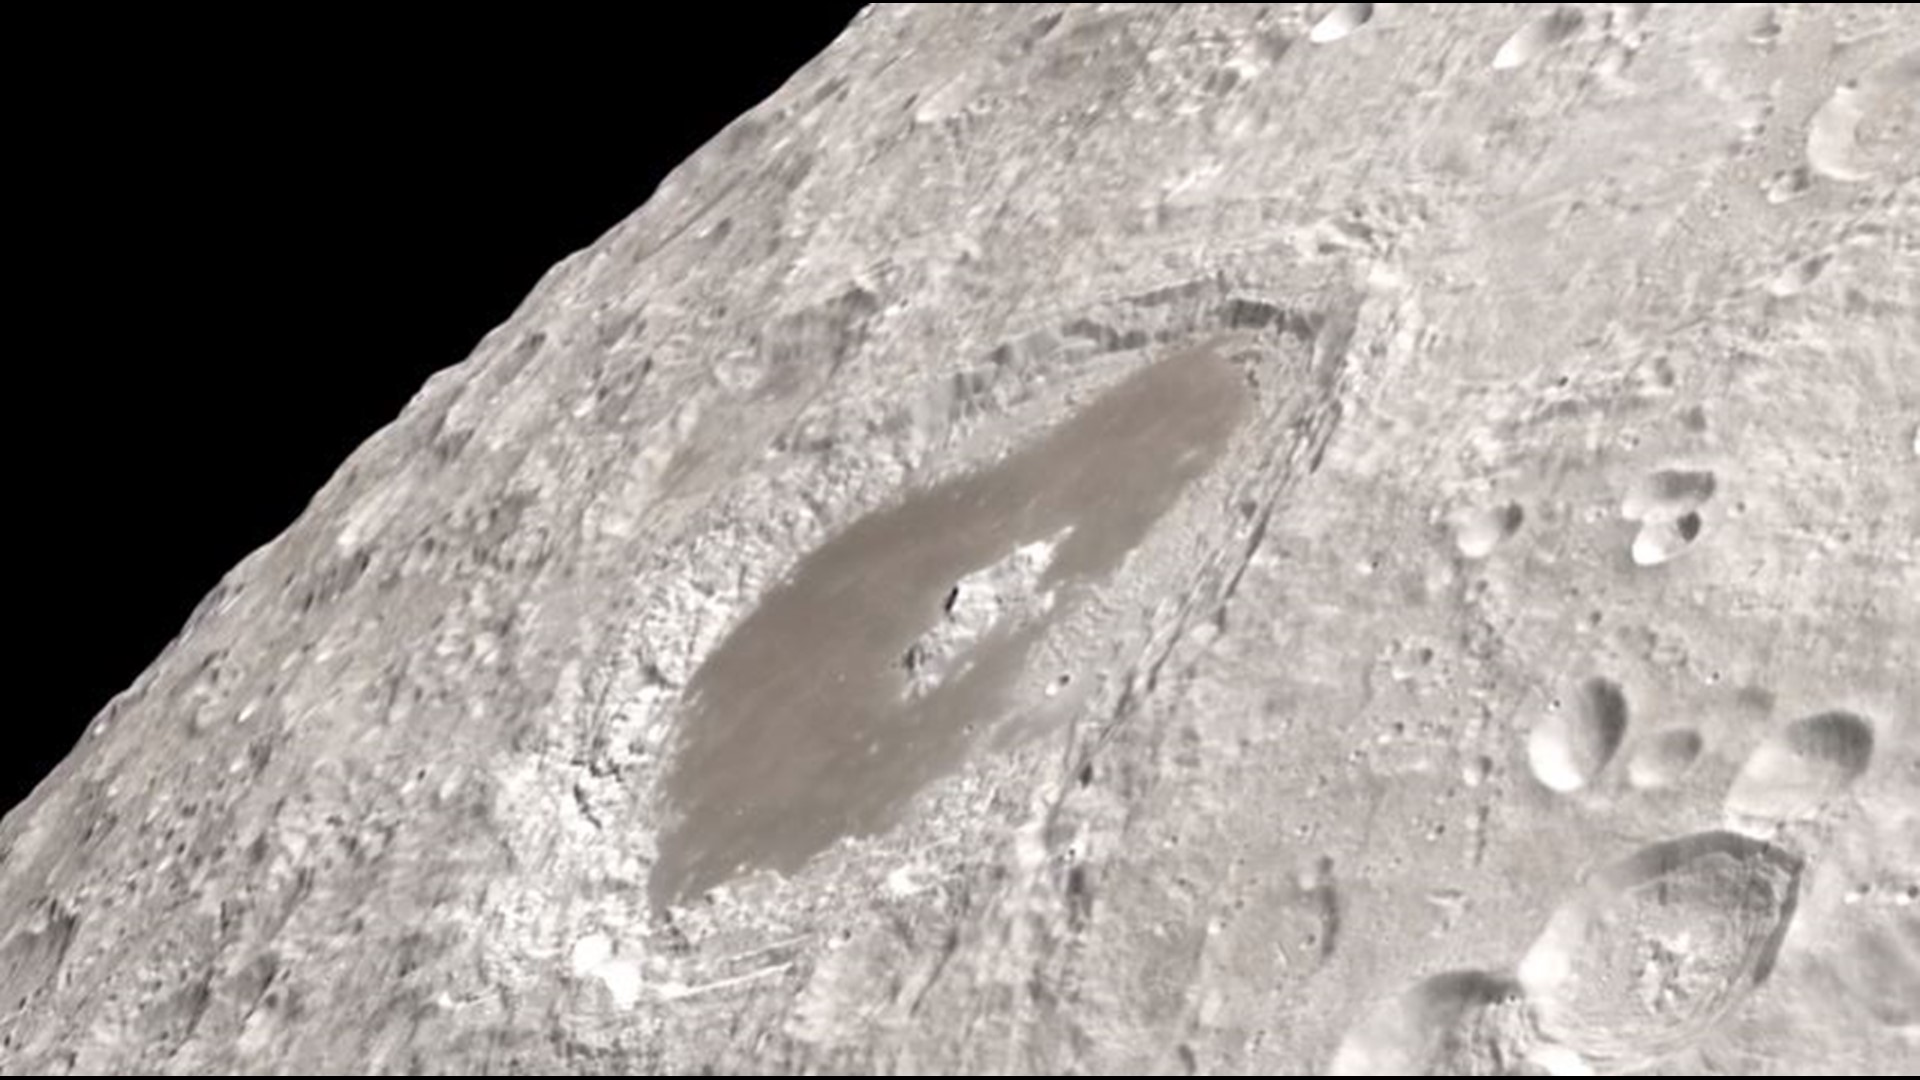 This video uses data gathered from the Lunar Reconnaissance Orbiter spacecraft to recreate some of what the Apollo 13 astronauts saw.